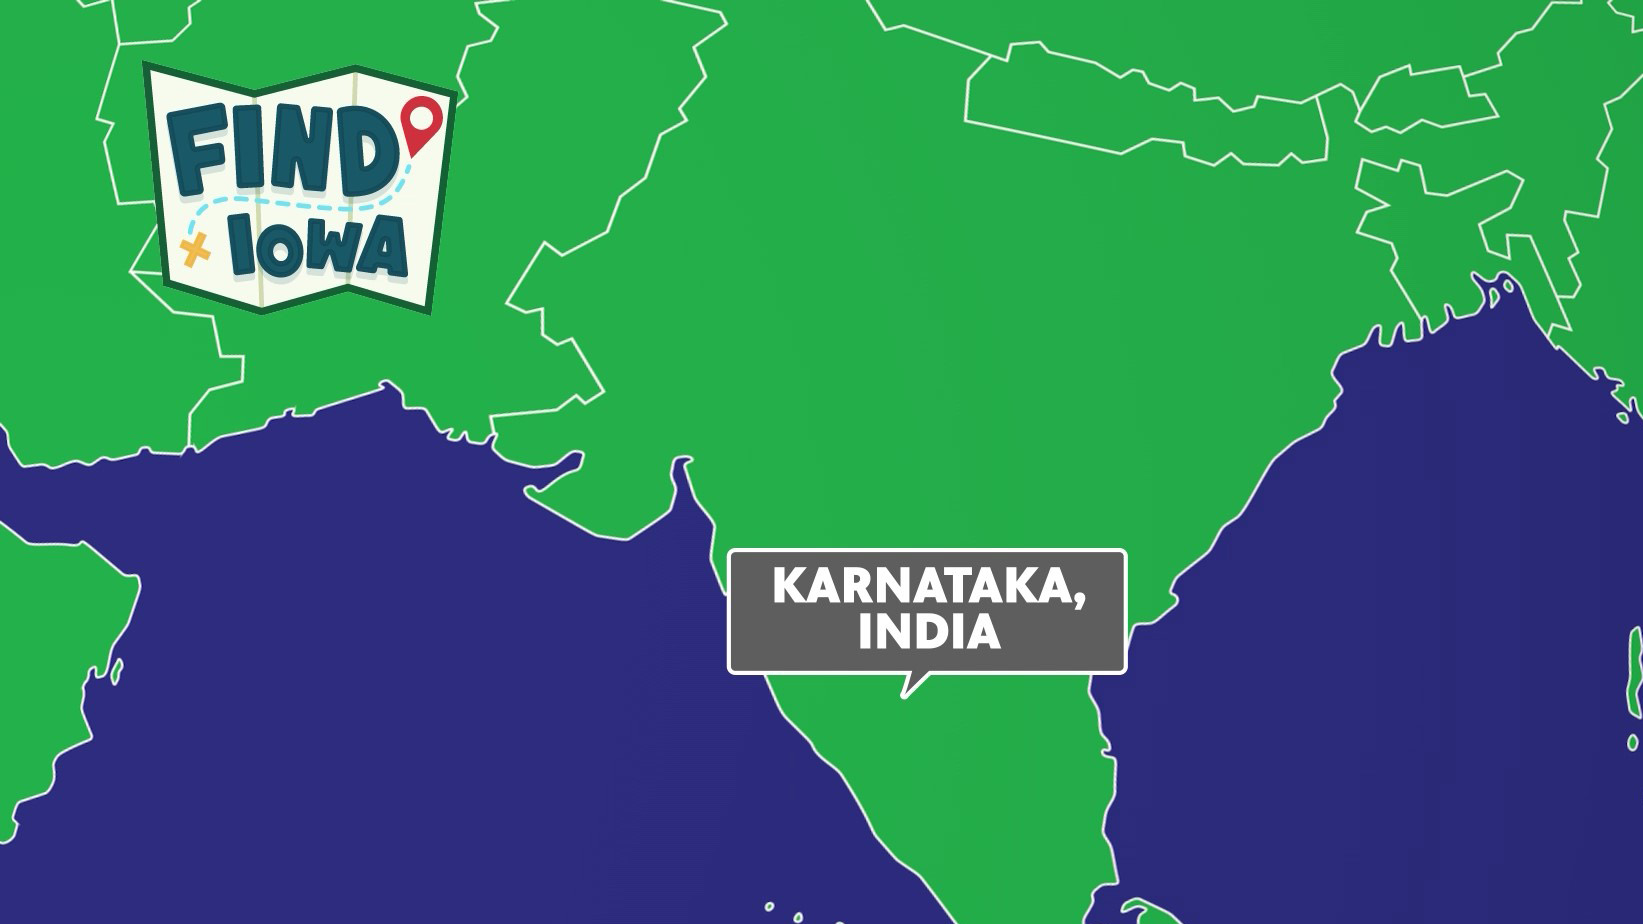 An image India with the state of Karnataka, in southeast India, identified.